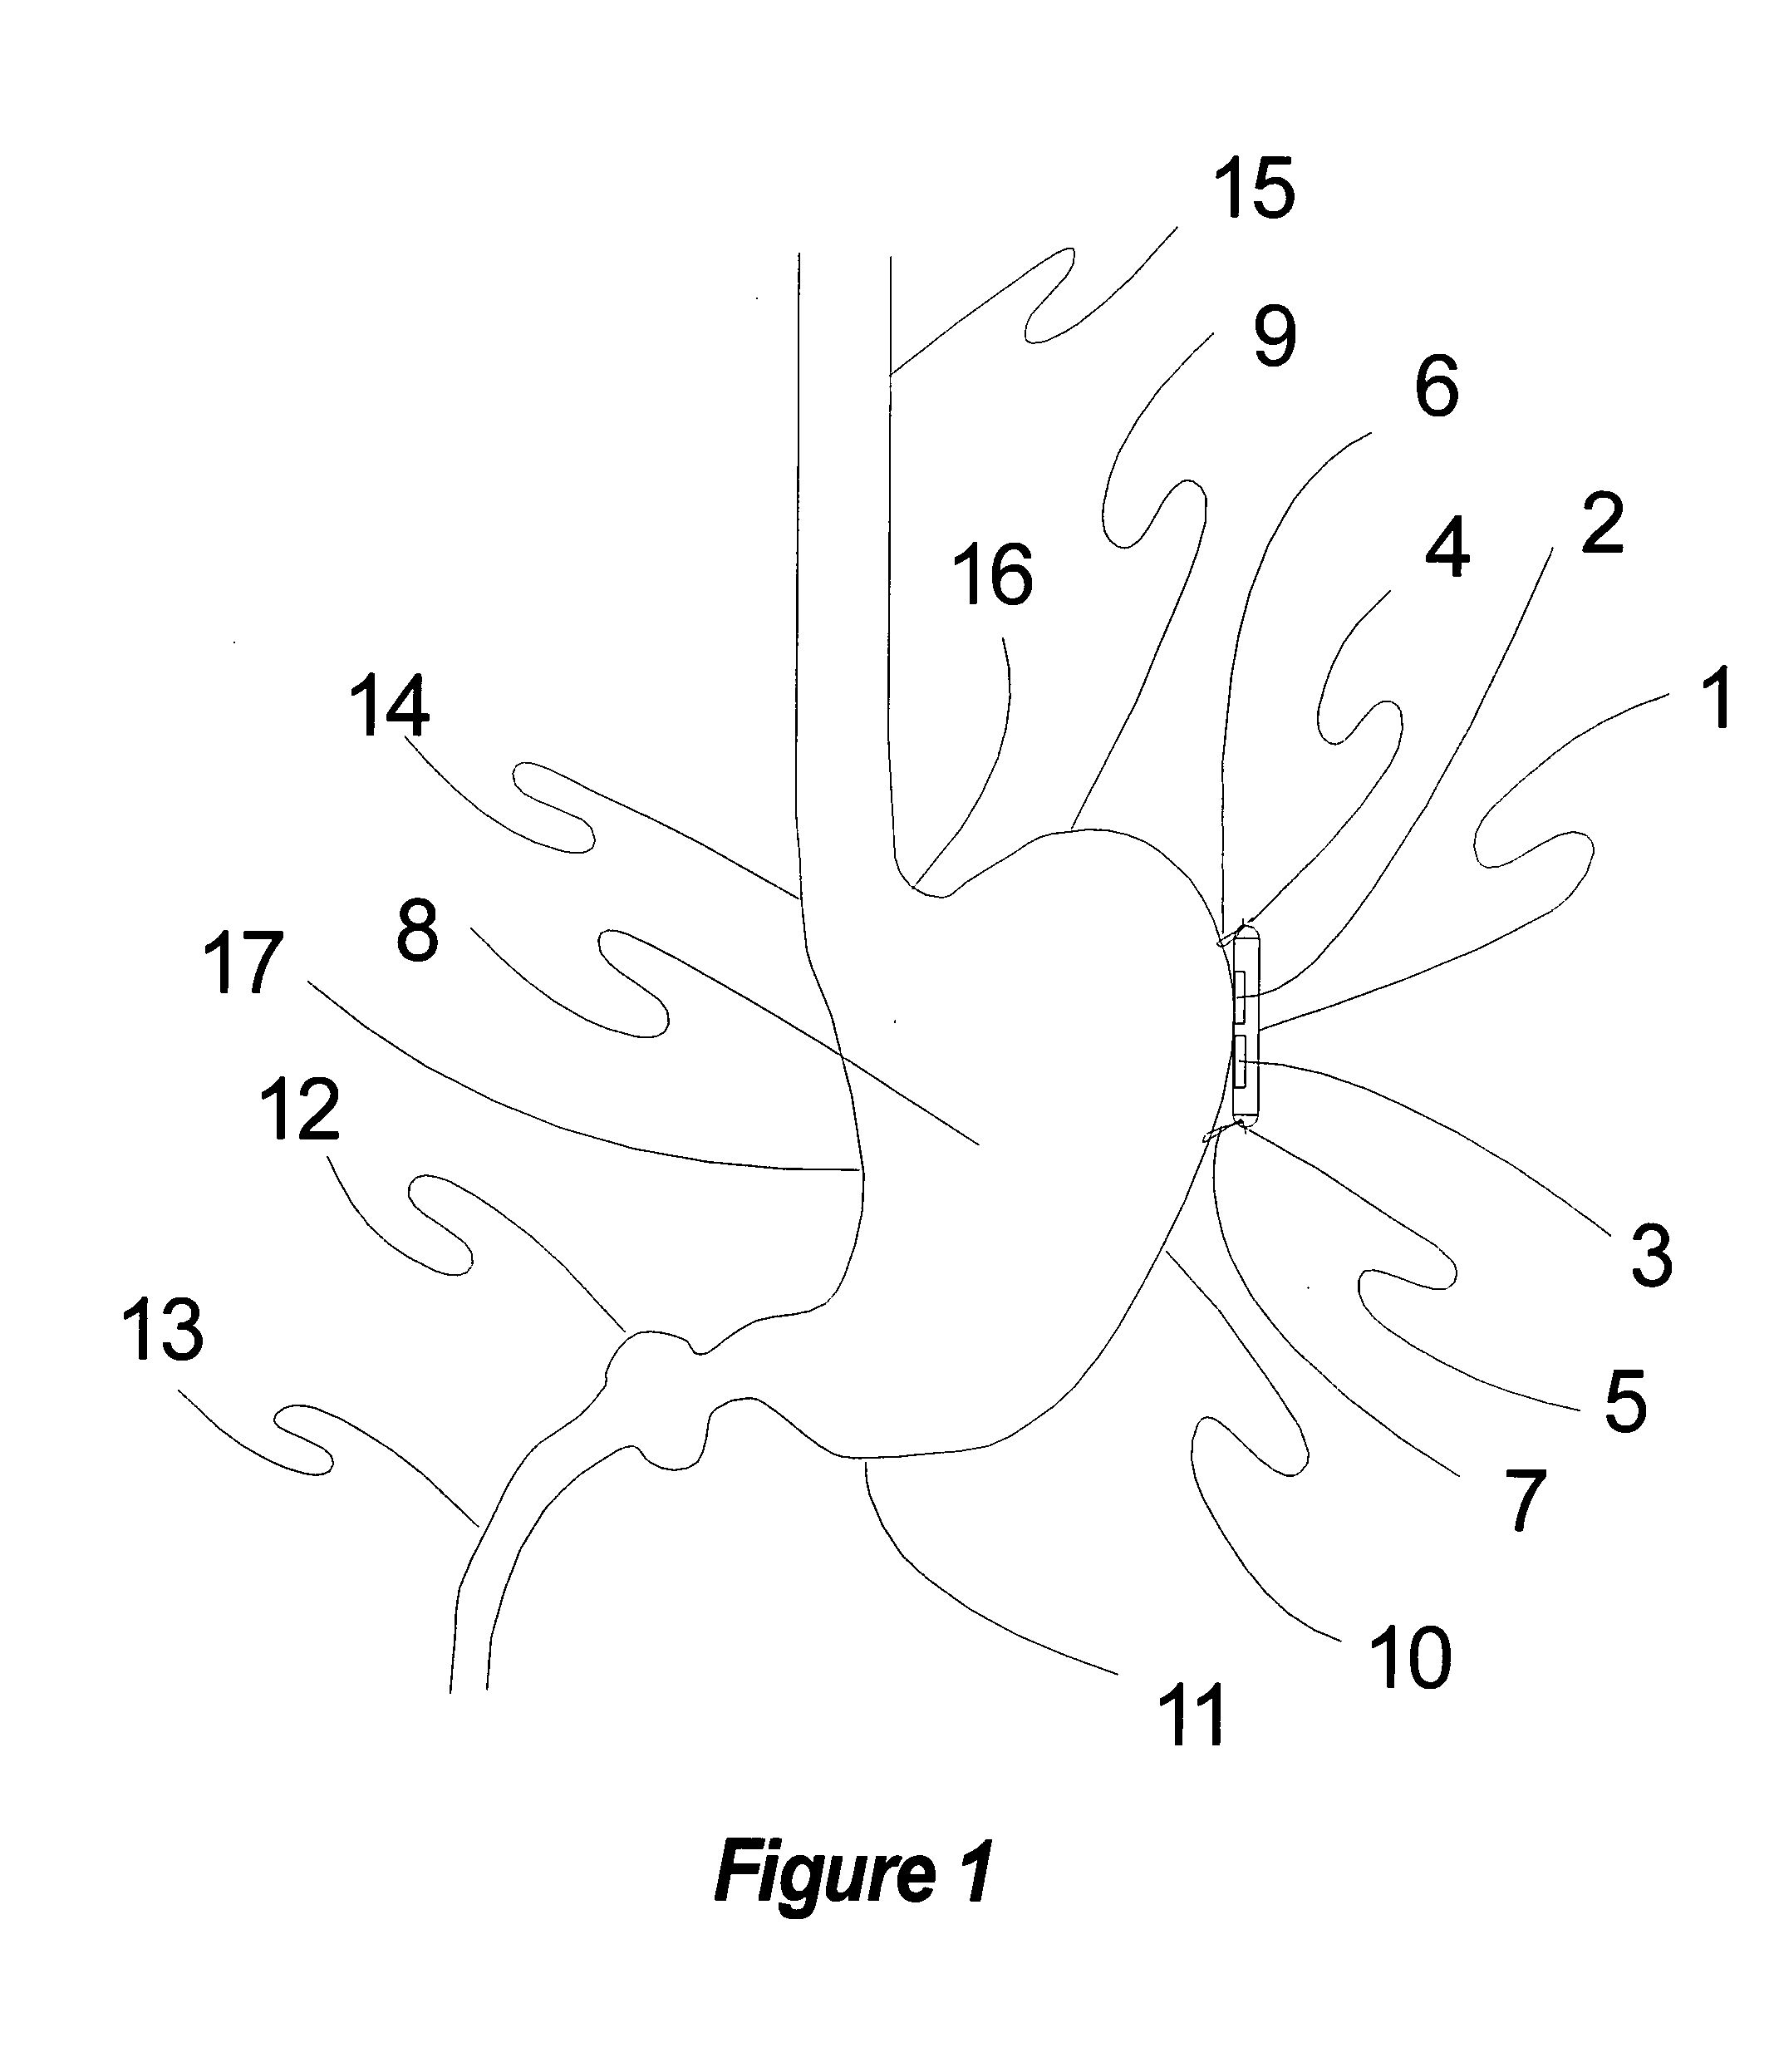 Method, apparatus, and surgical technique for autonomic neuromodulation for the treatment of disease